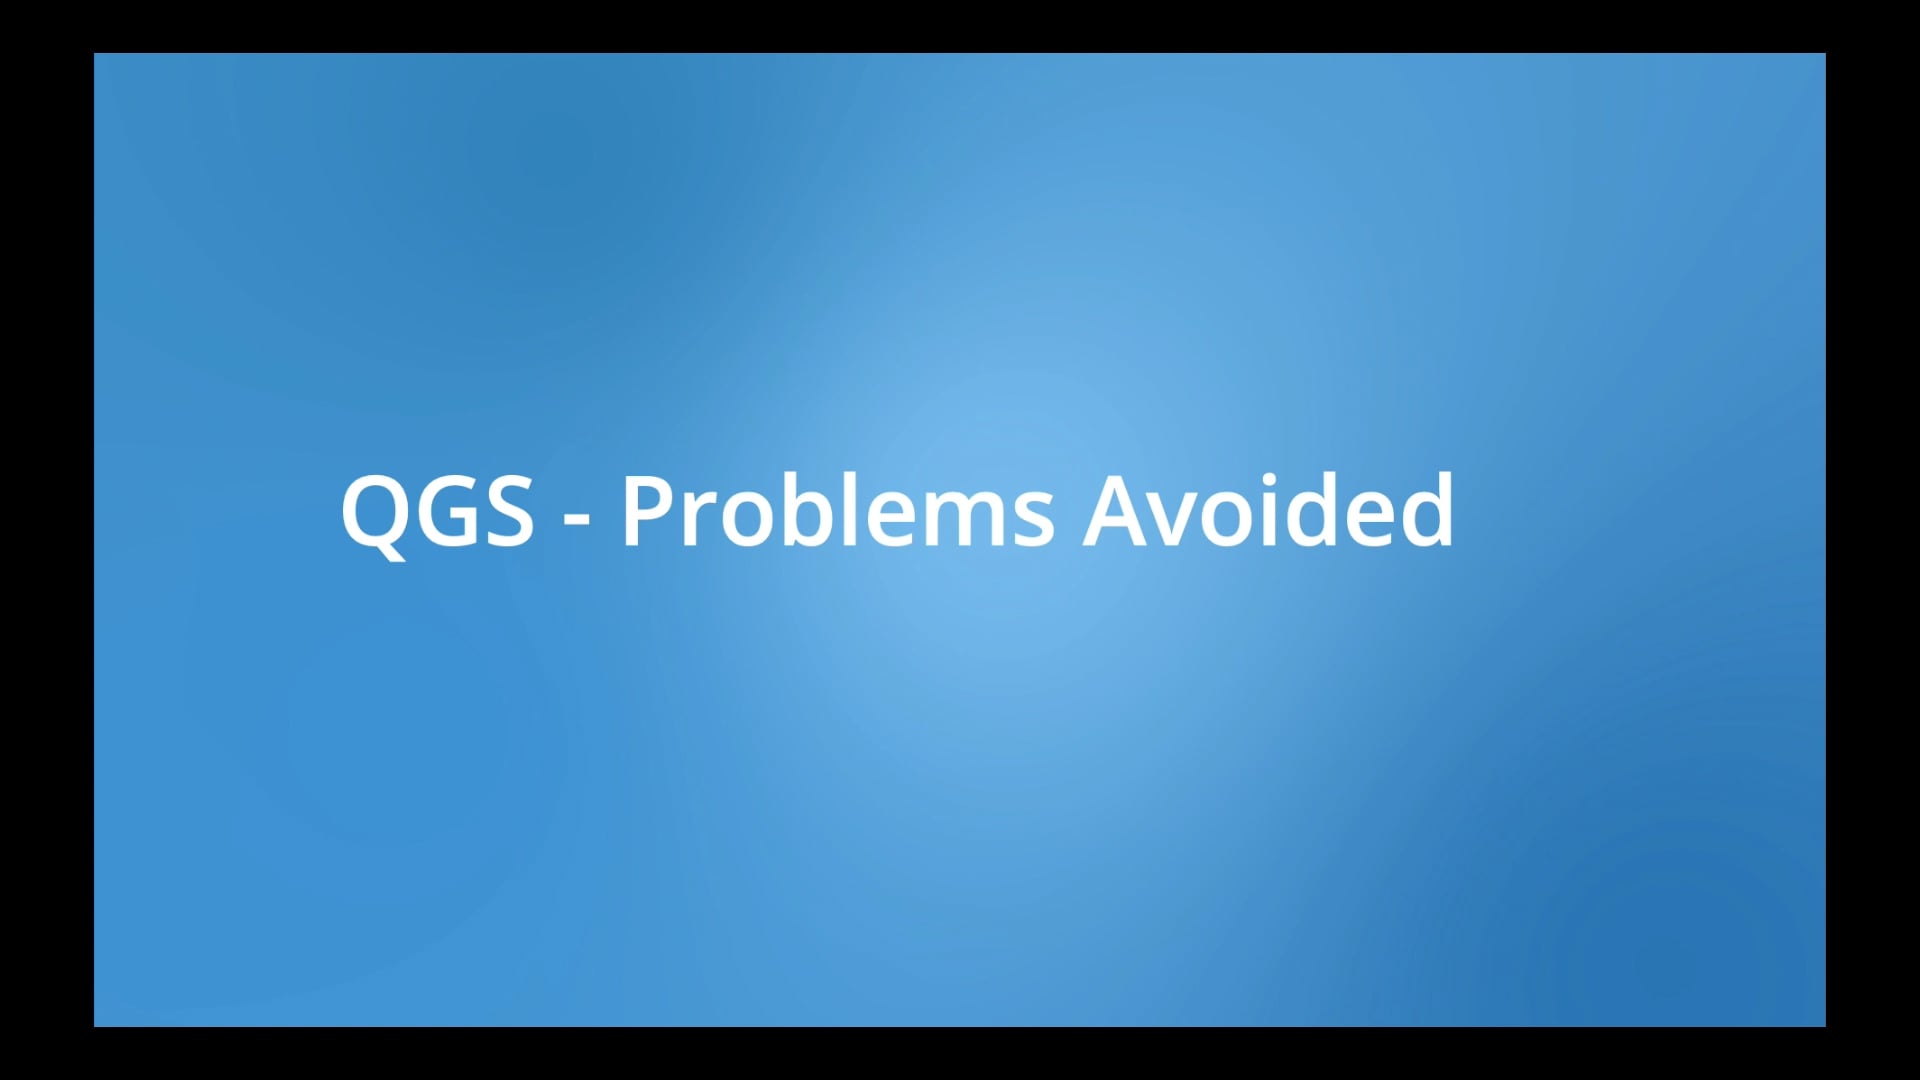 QGS - Avoided Problems